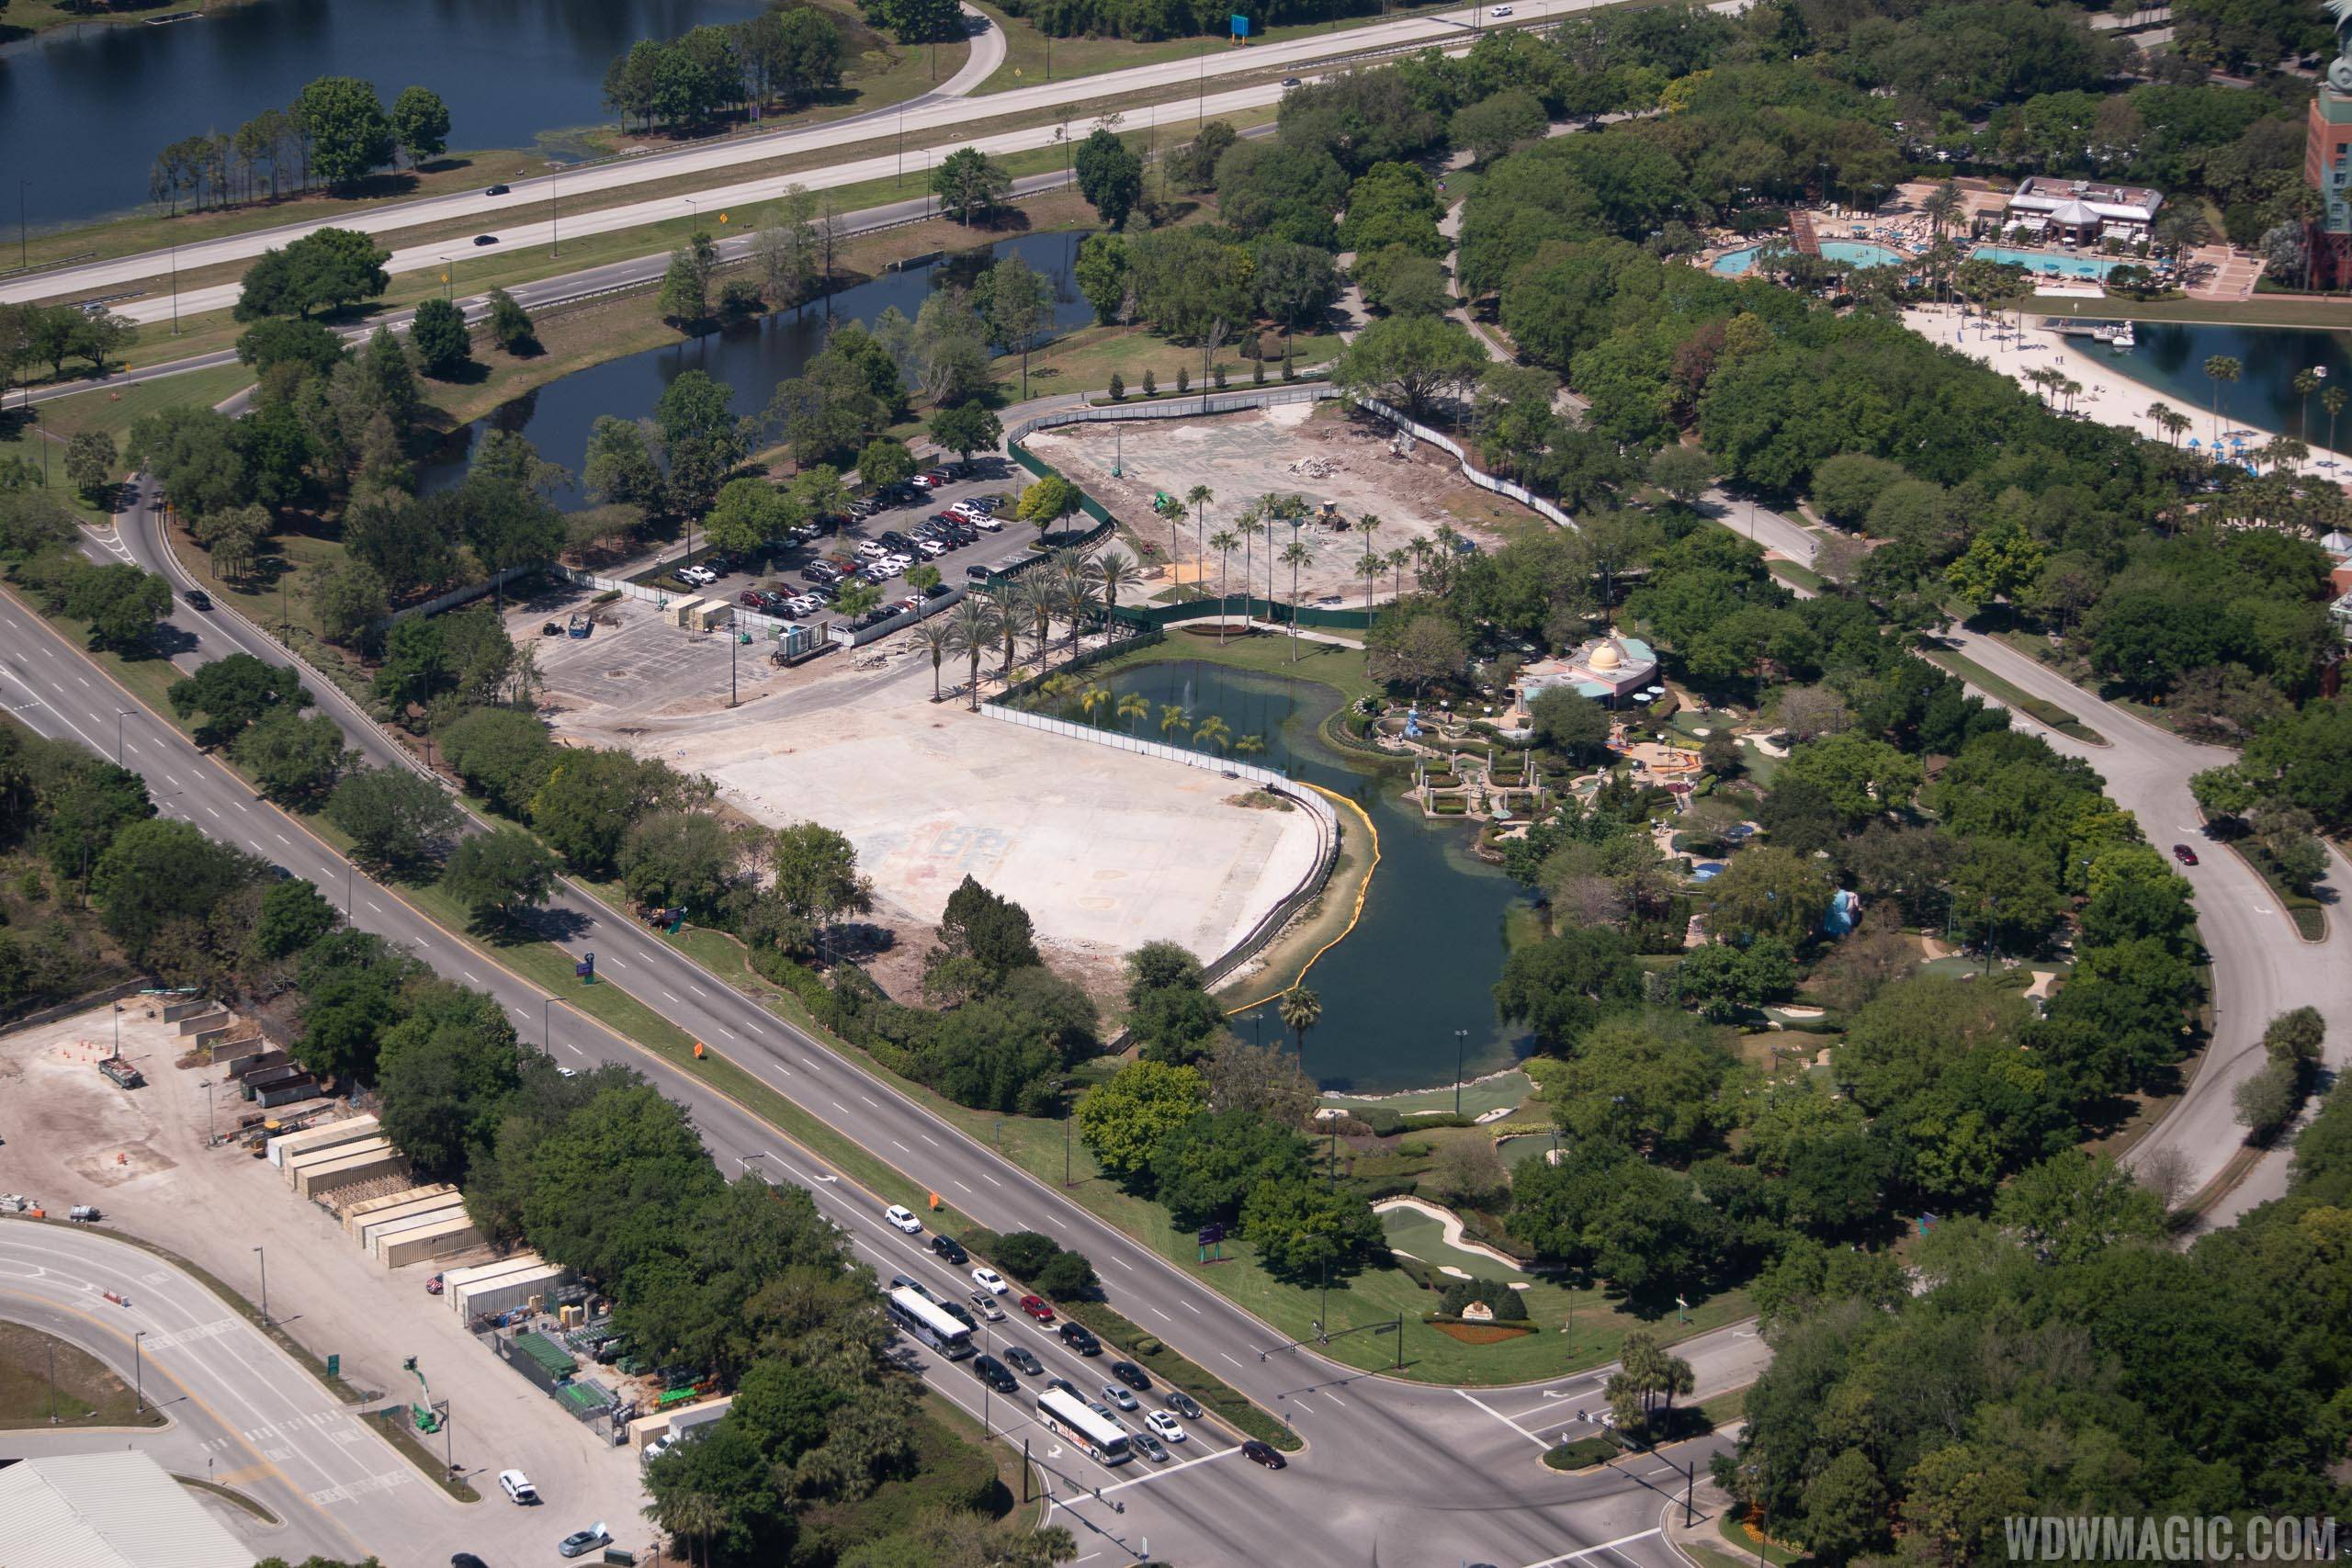 PHOTOS - Aerial view of The Cove construction site at the Walt Disney World Swan and Dolphin